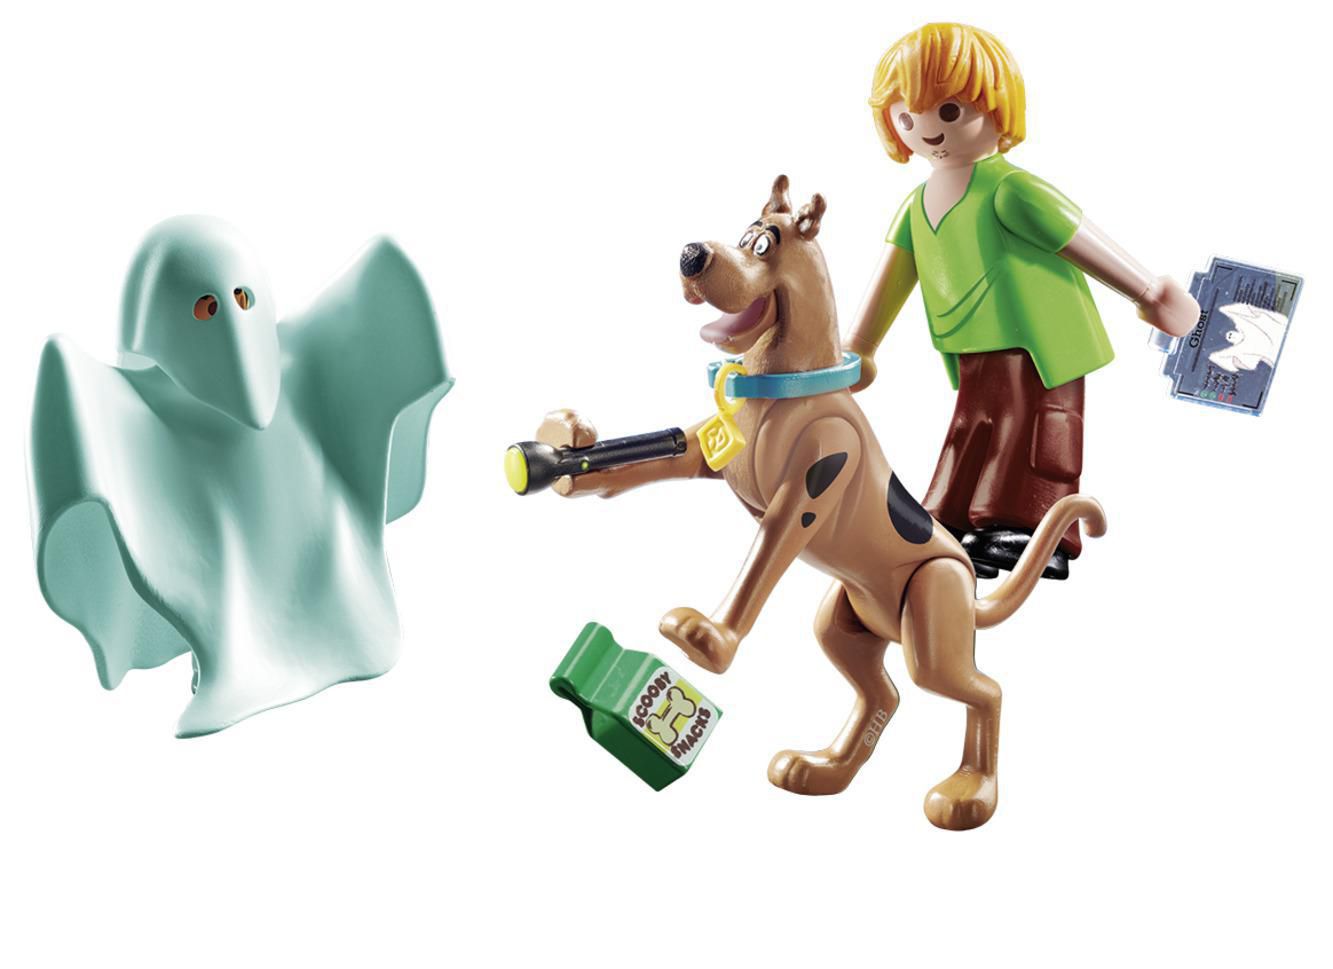 Playmobil SCOOBY-DOO! Scooby & Shaggy with Ghost 70287 Play Set, Age 4+, 19  pcs